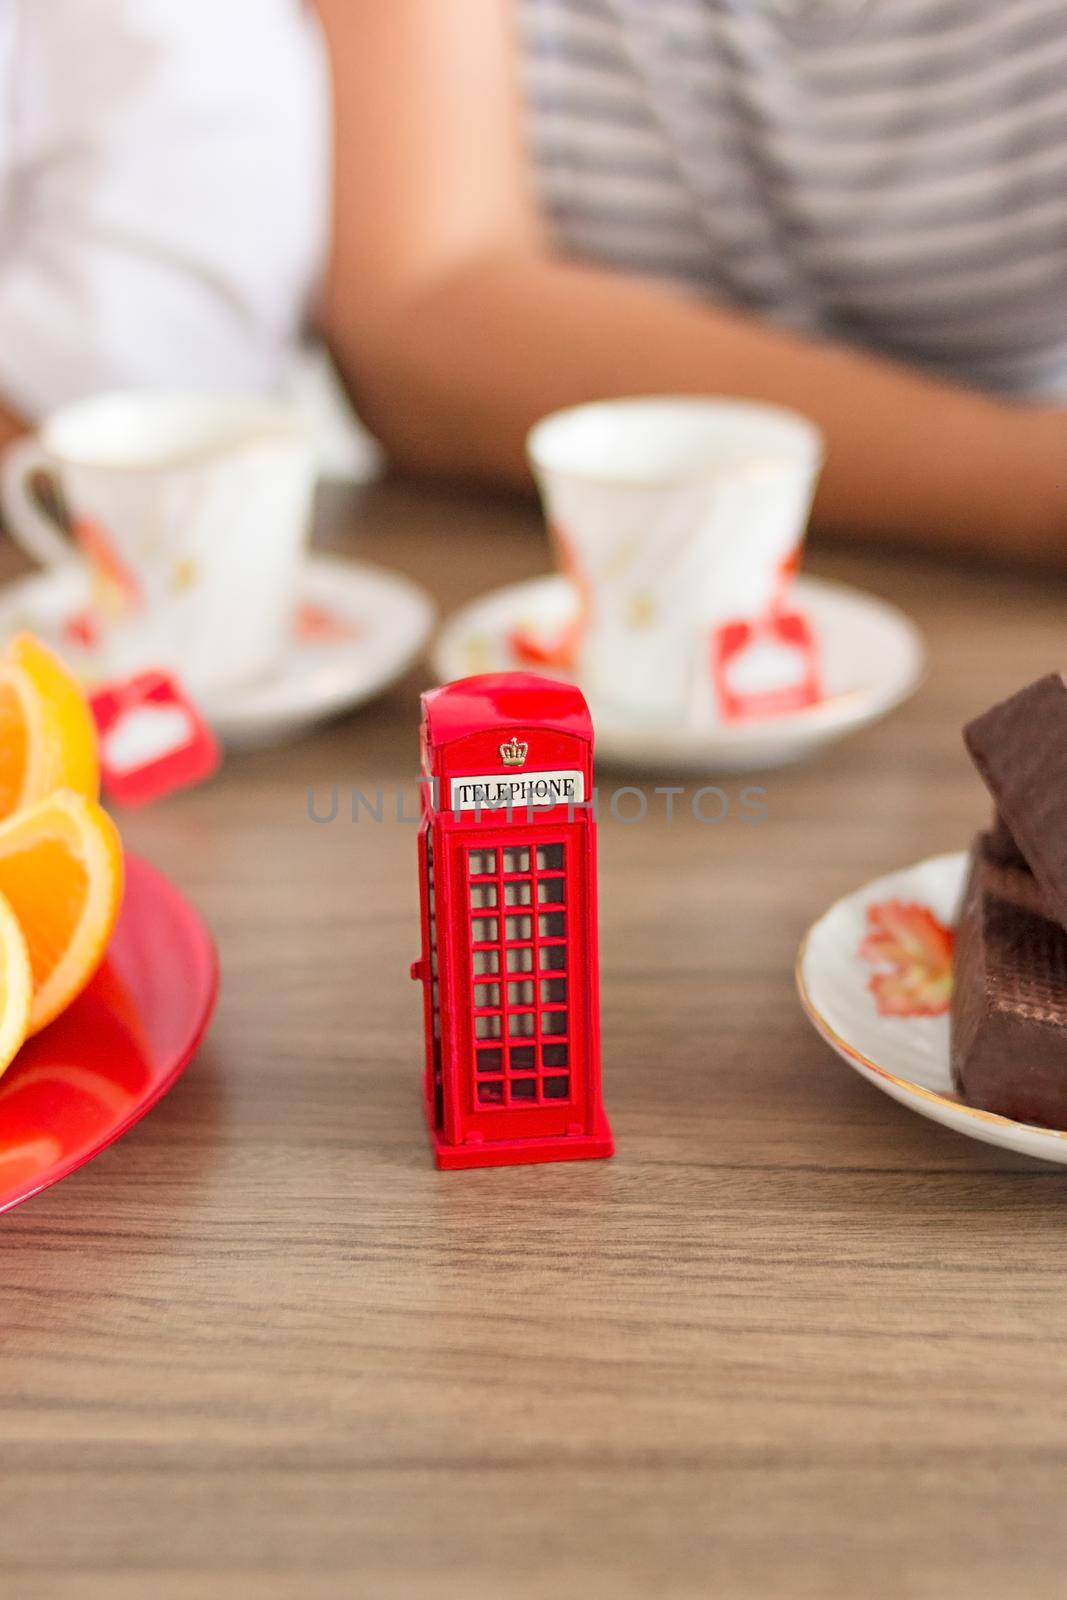 Traditional afternoon tea of british ceremony with such symbol of britishness as toy telephone box, defocused faceless women on background, front focus, vertical image